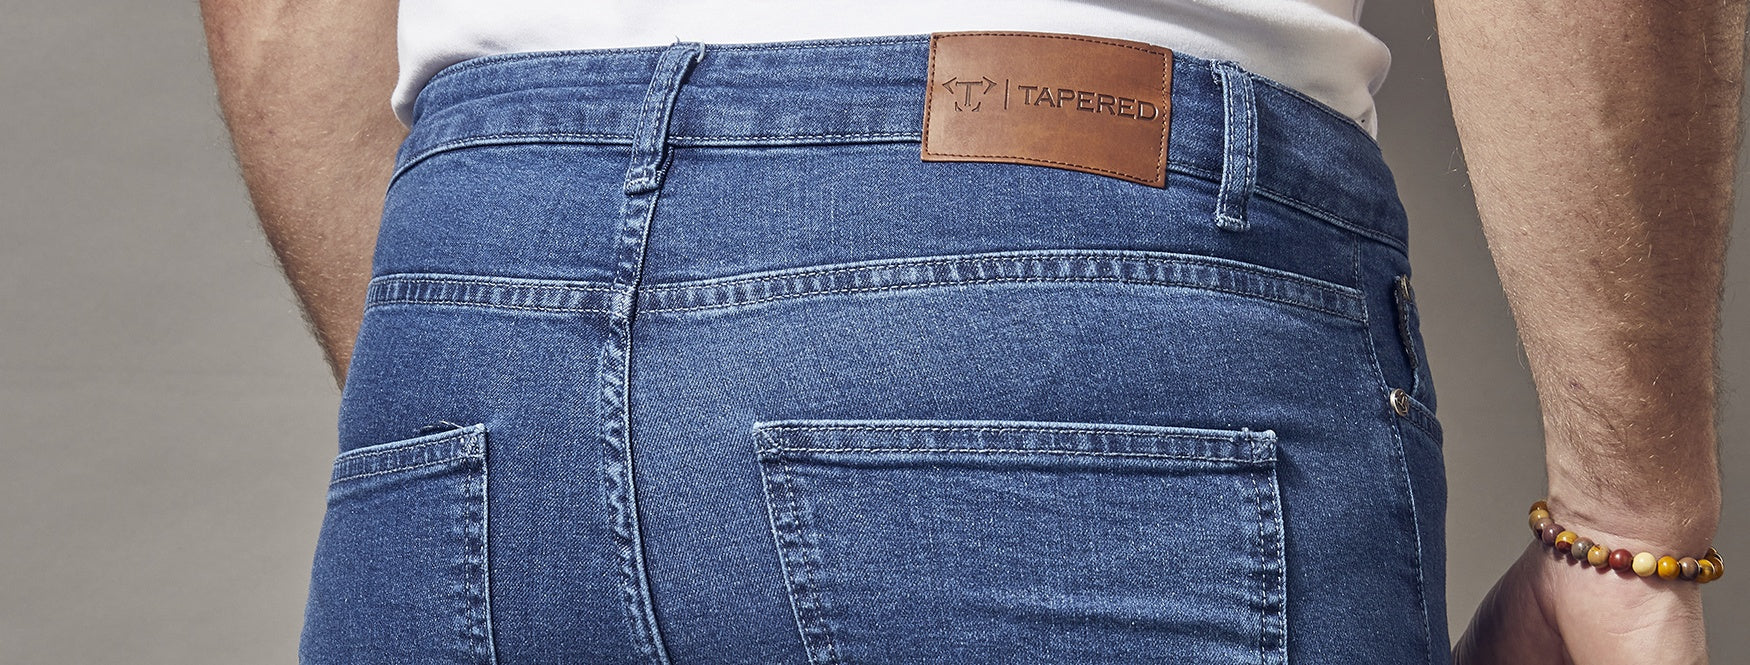 Quick Fix to Make Your Jeans Fit Better - No Sewing Needed!